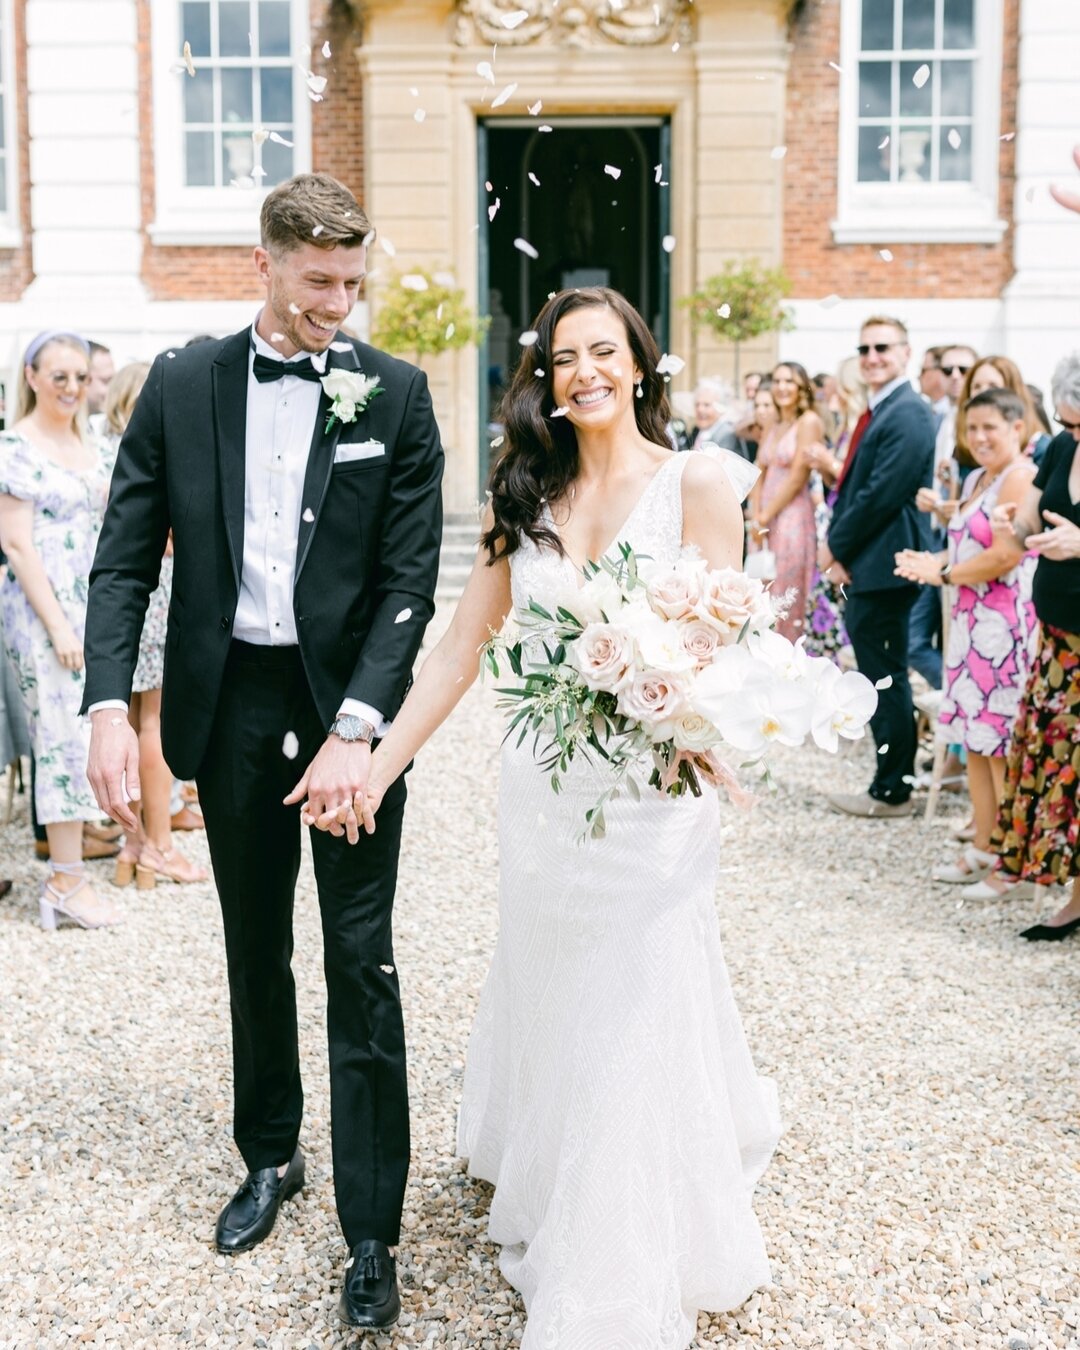 Looking back at Lauren &amp; Adam's romantic black tie wedding at @pyneshouse. A sunny outdoor ceremony, followed by drinks in the Rose Garden and their wedding breakfast in The Ballroom. 🖤

Can't wait to return here for spring &amp; summer weddings